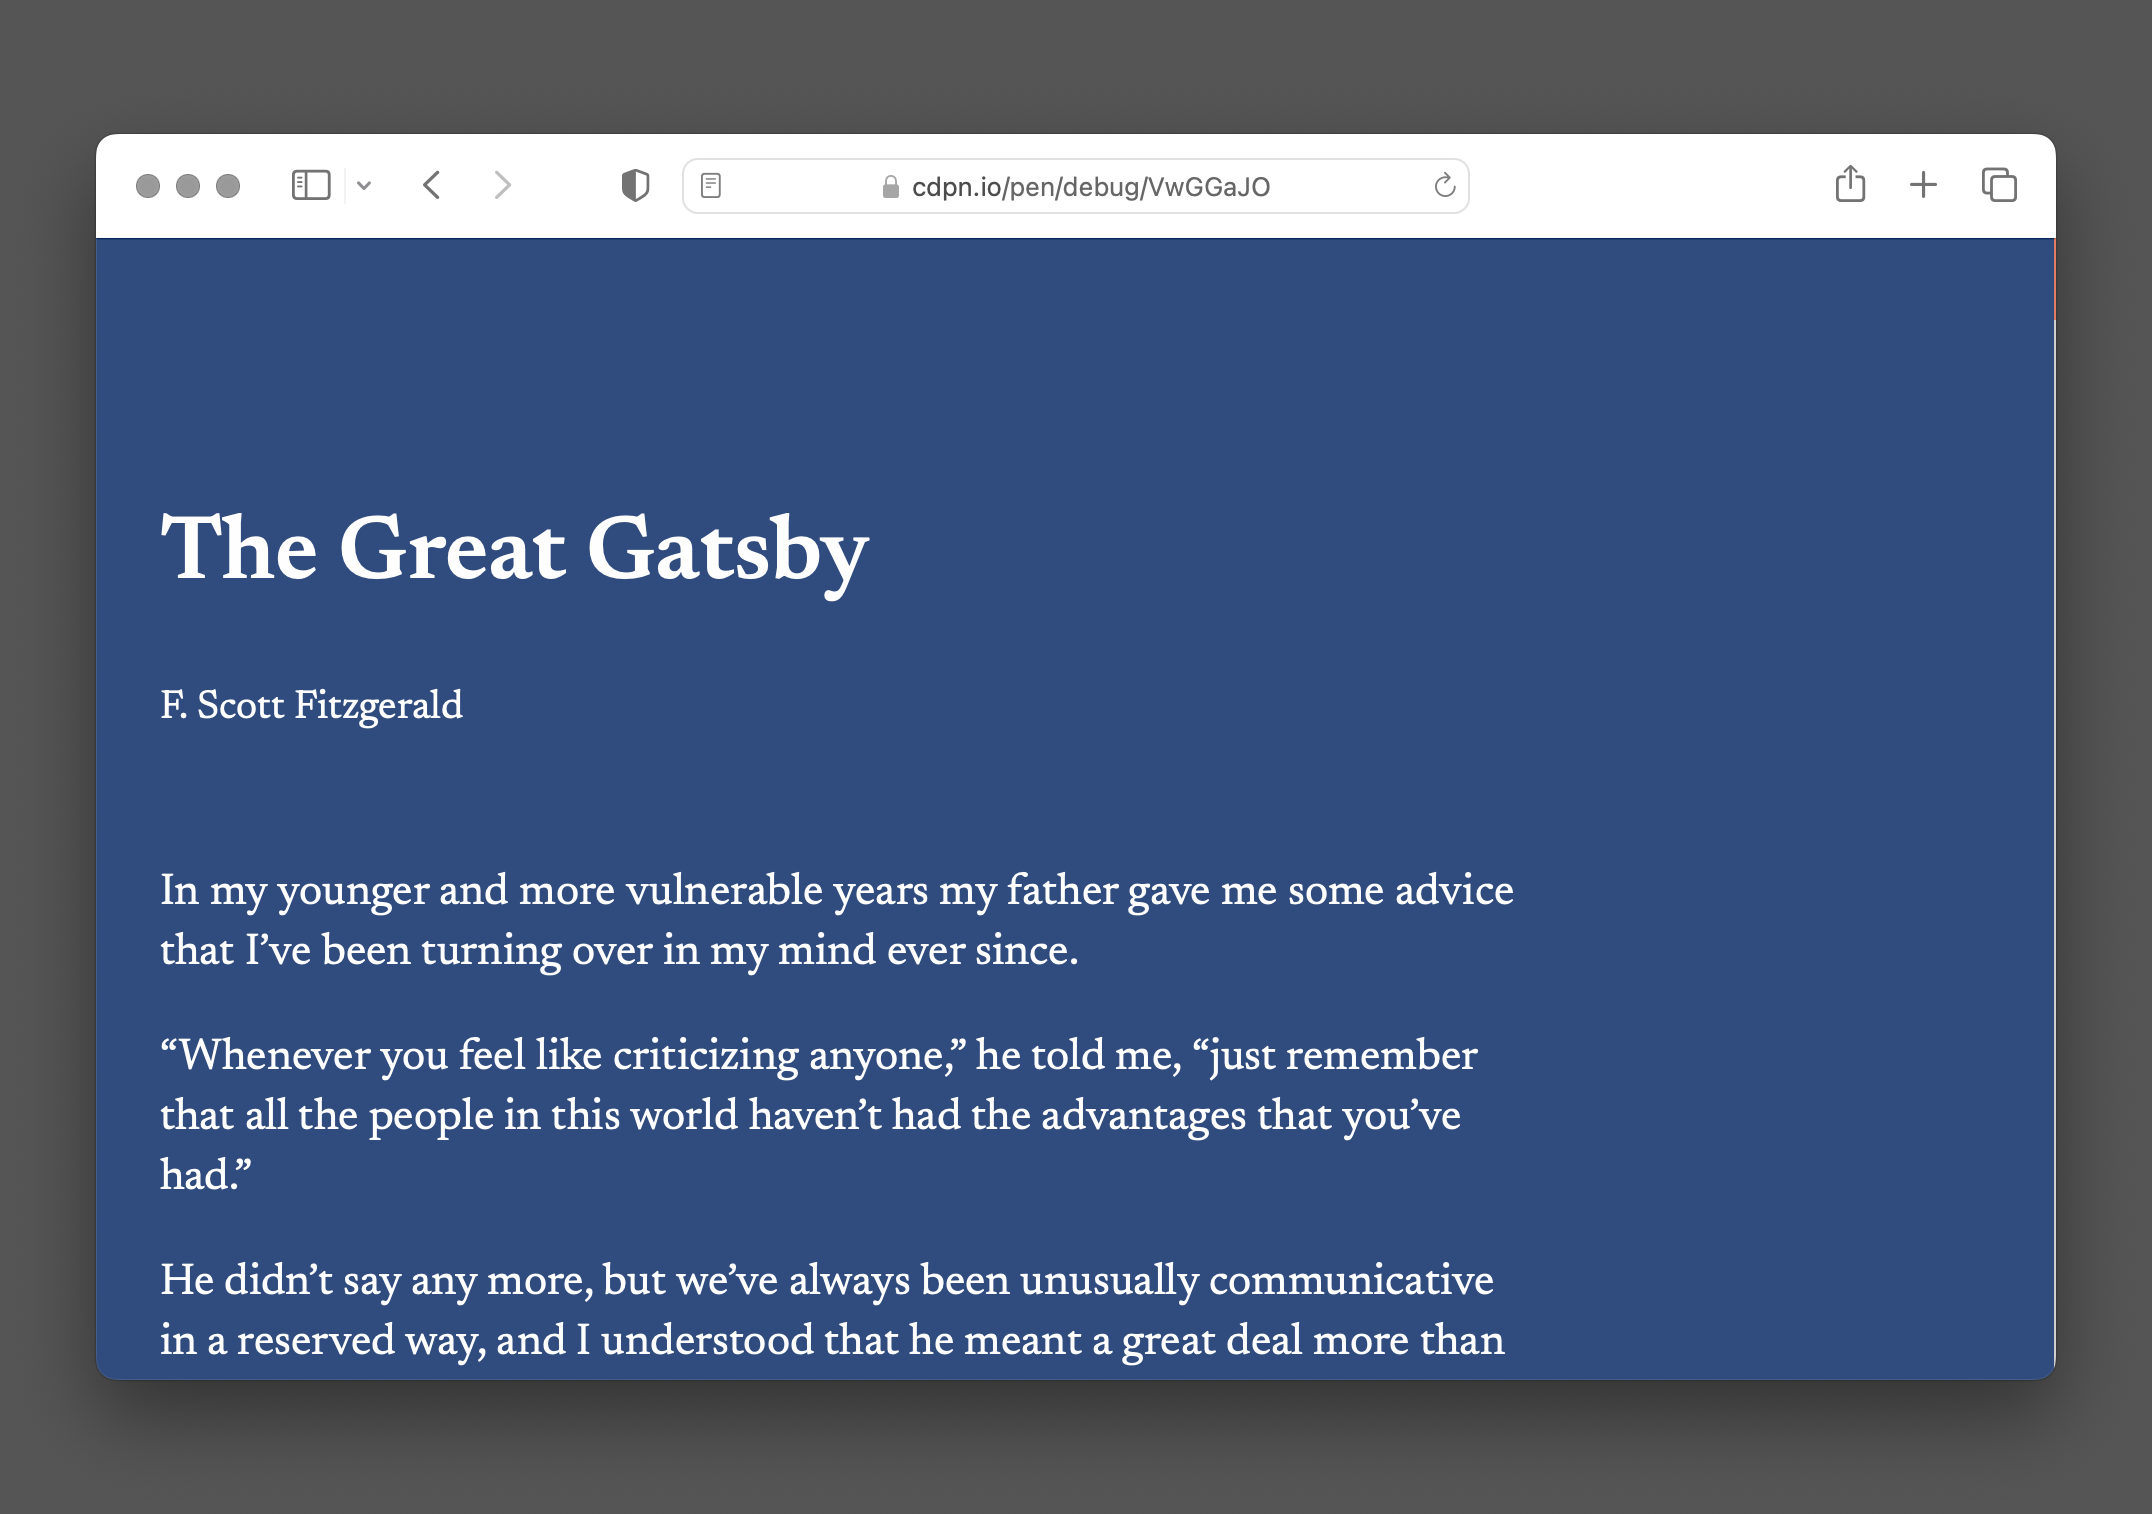 Safari with a tab open to a CodePen set the display opening text to The Great Gatsby. The scrollbar has a hairline width that is just barely perceivable. Screenshot.